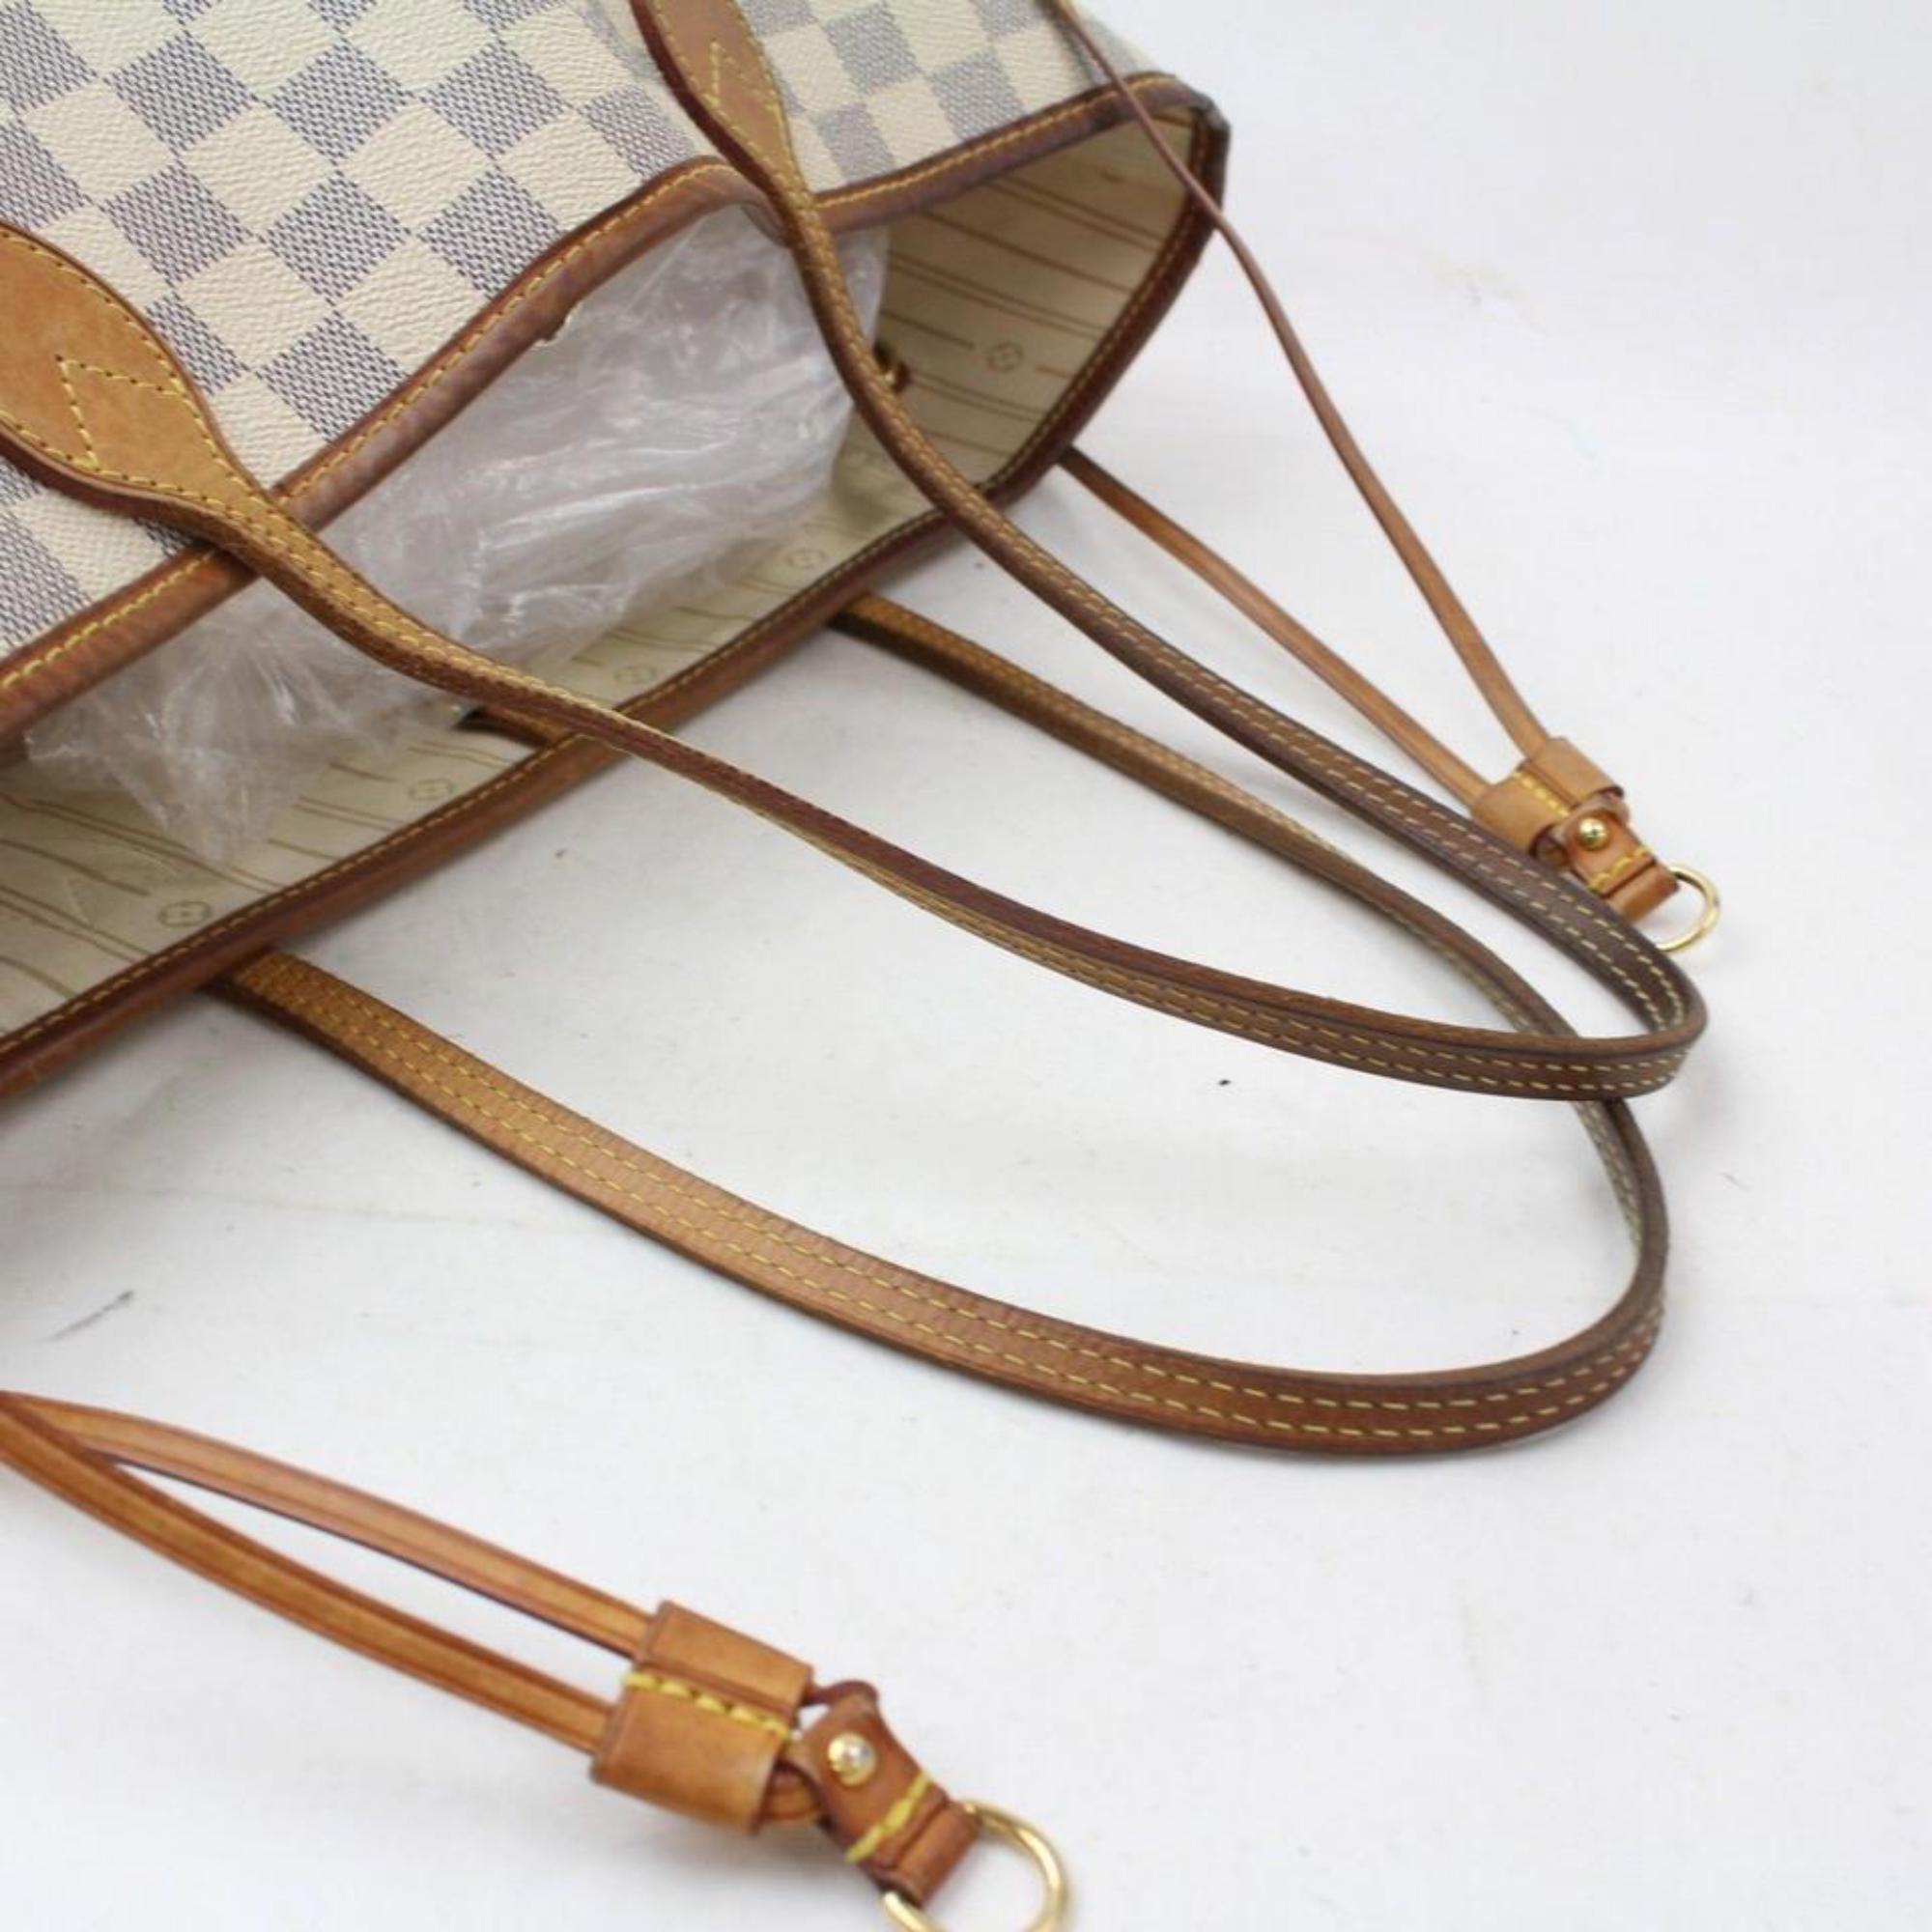 Louis Vuitton Neverfull Damier Azur Mm Everyday Shopper 868990 Canvas Tote In Good Condition For Sale In Forest Hills, NY